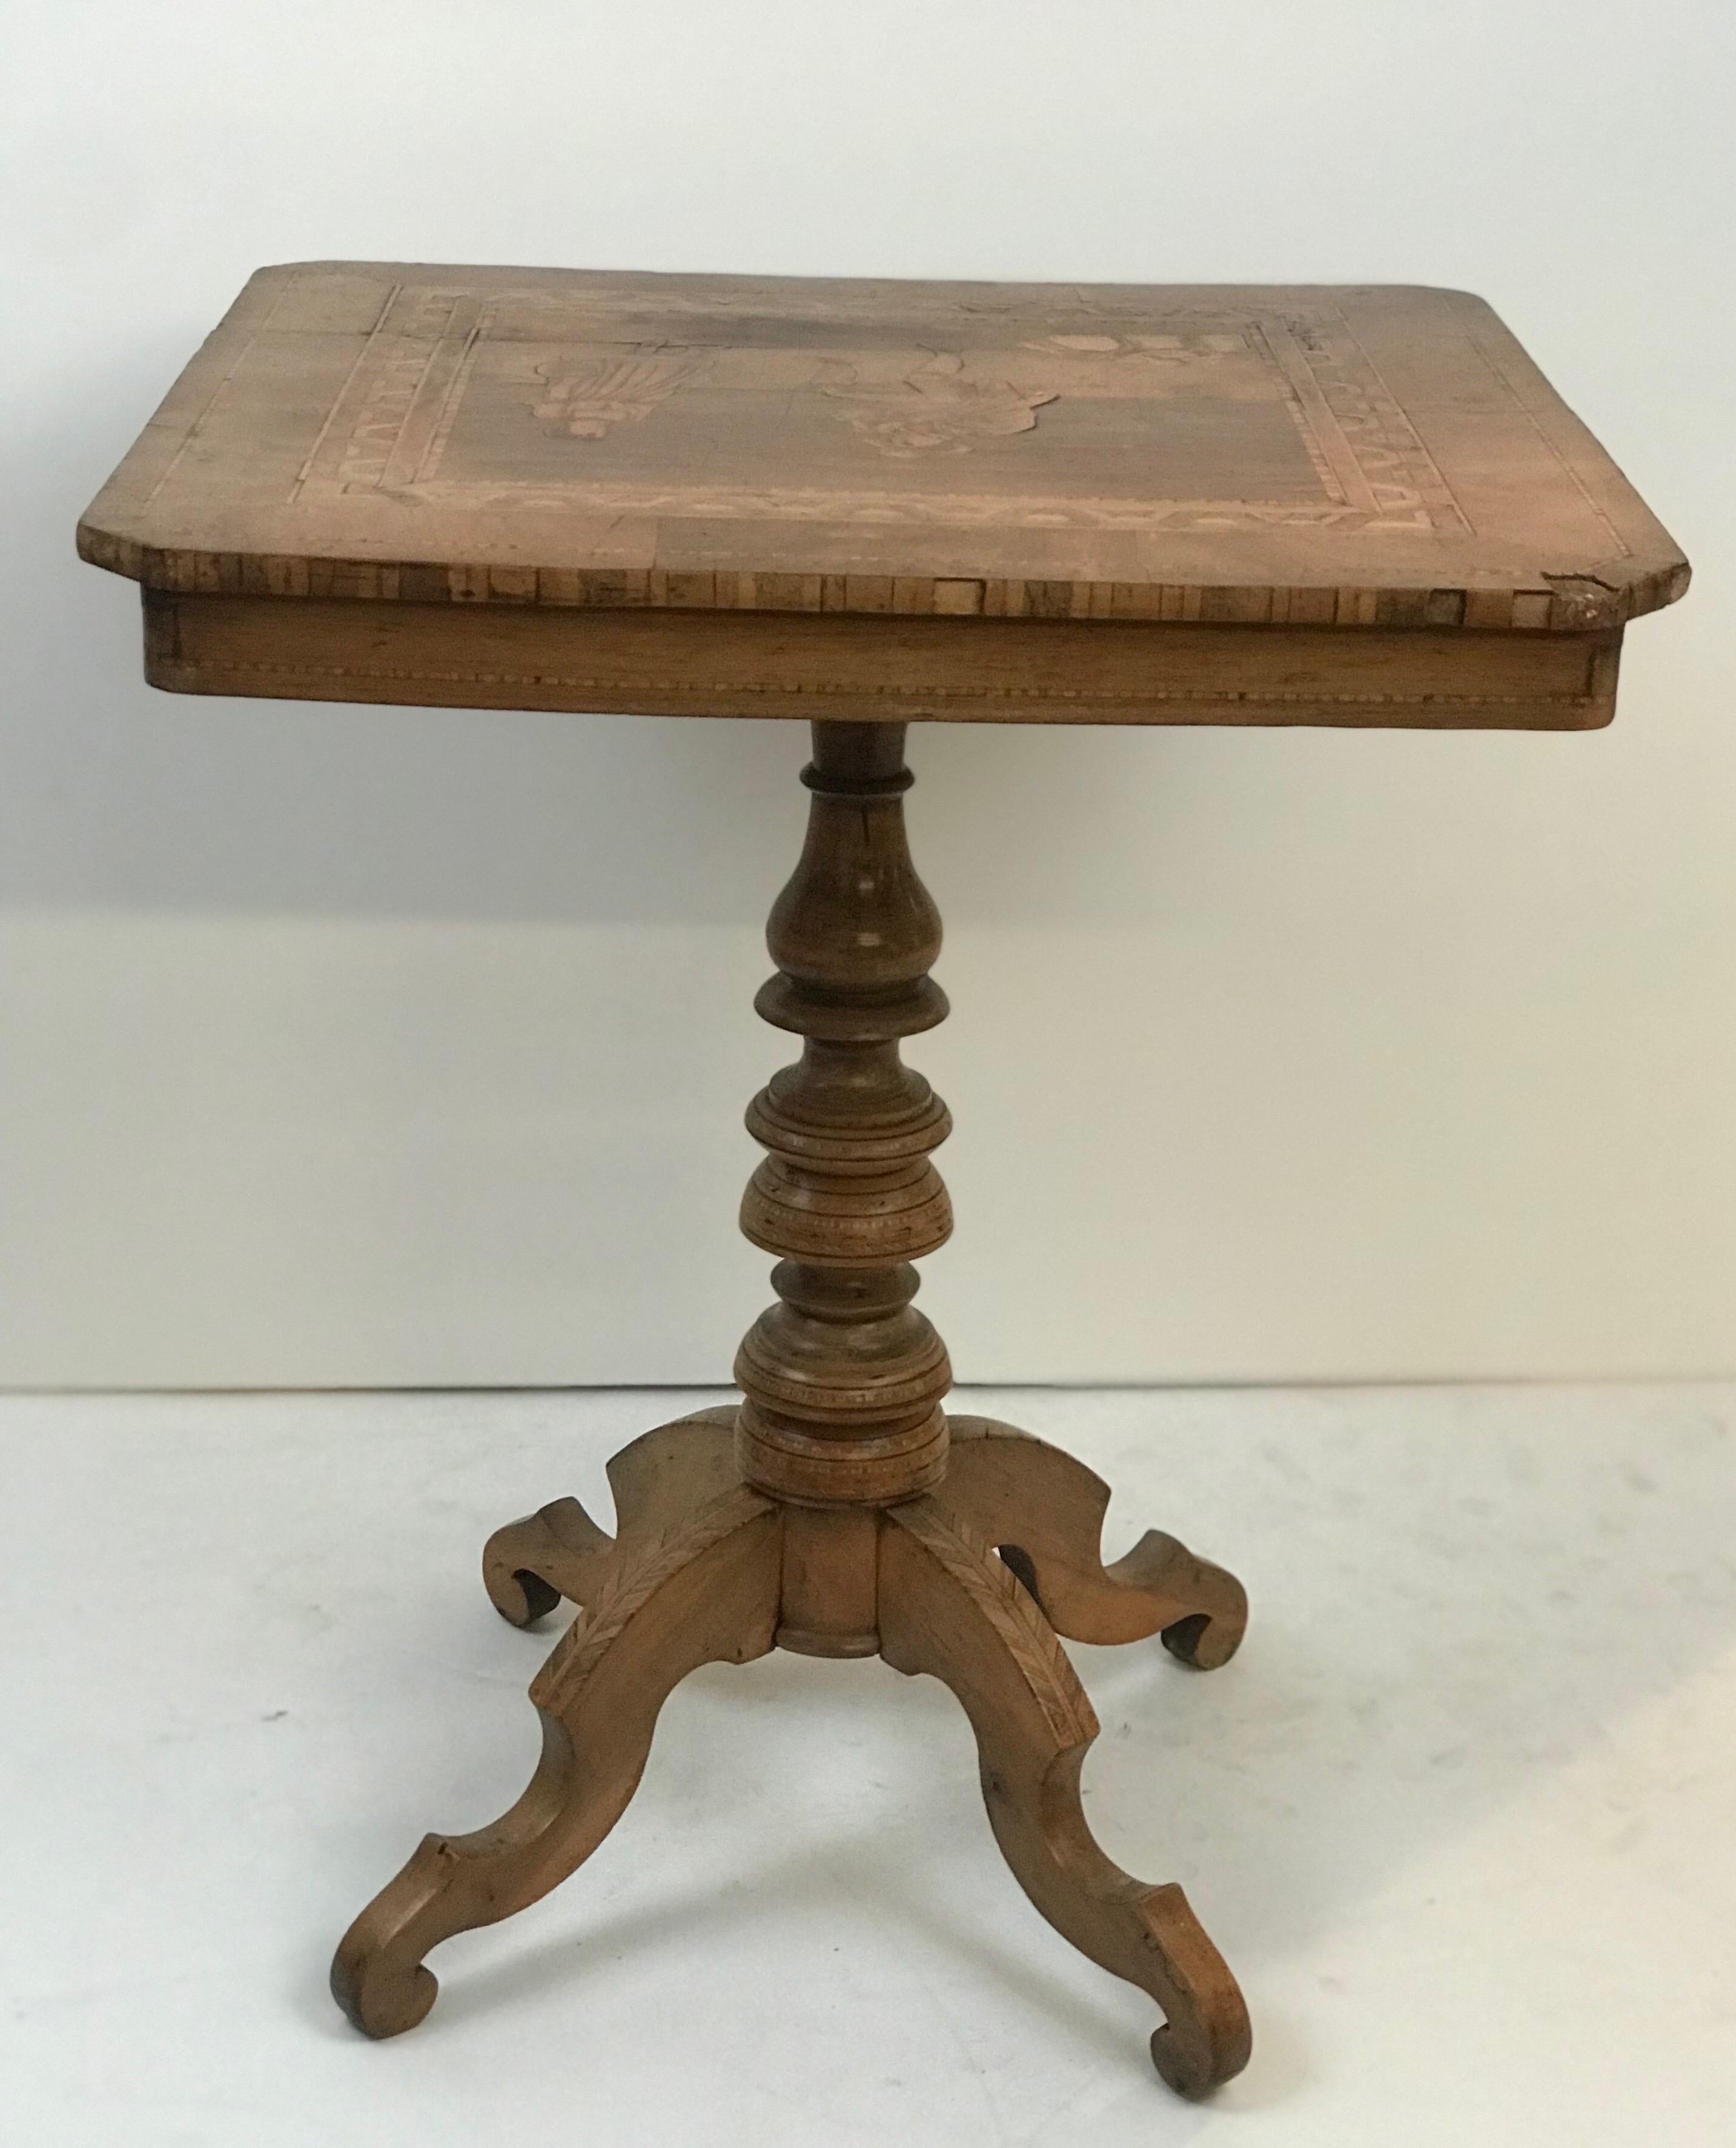 A Late 1800's Sorrento Marquetry Desert Table with Figural Classical Motif  In Good Condition For Sale In Fort mill, SC